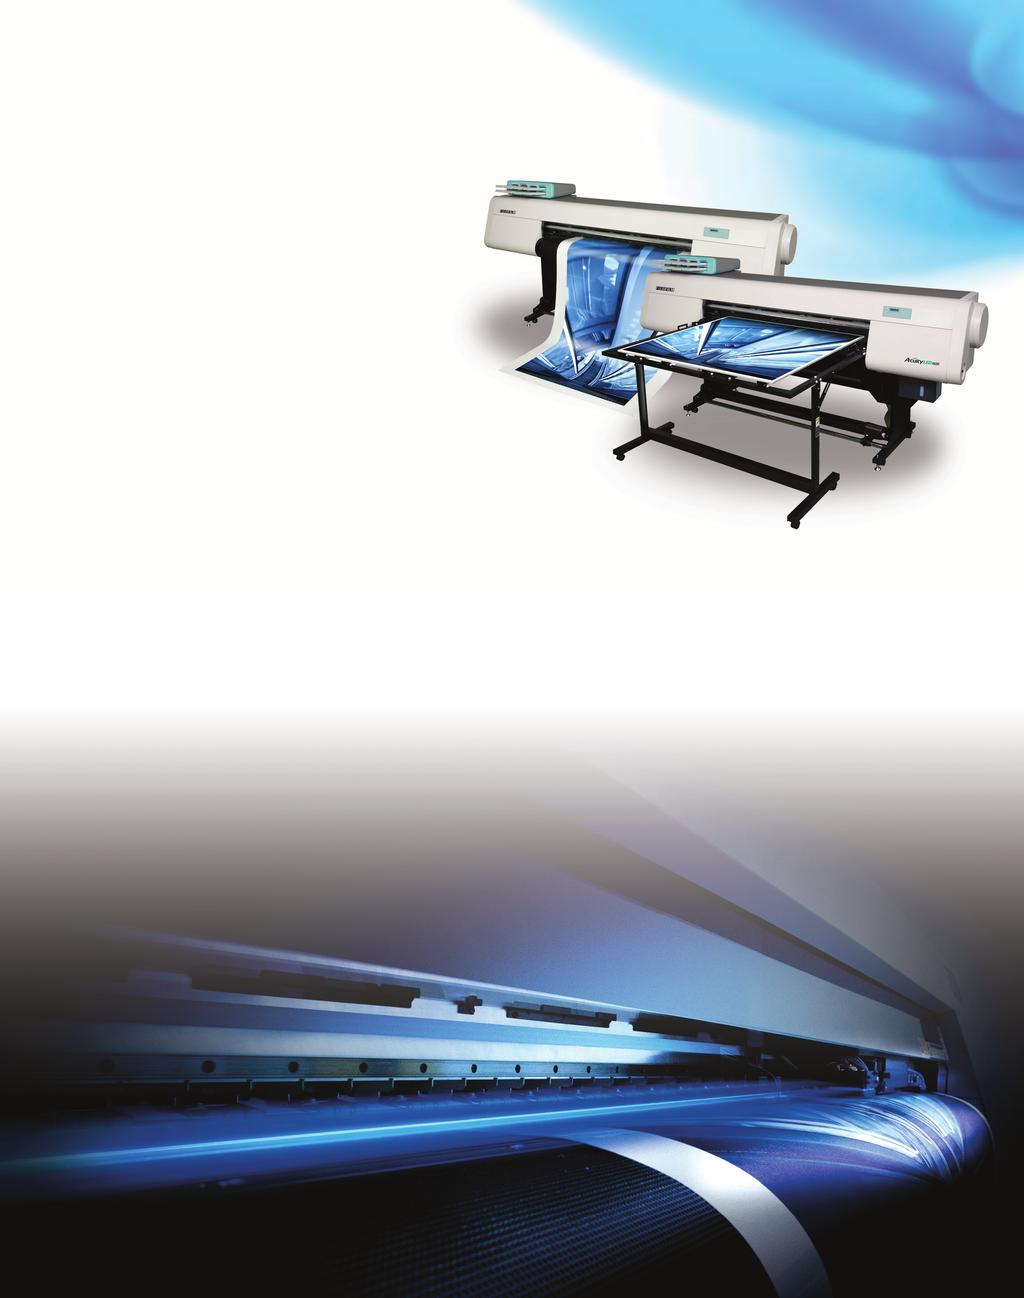 WIDE FORMAT UV INKJET PRINTING SOLUTIONS Acuity LED 1600 Large format hybrid printer driven by Fujifilm technology, designed for creativity LED UV has the capability to be a leading inkjet technology